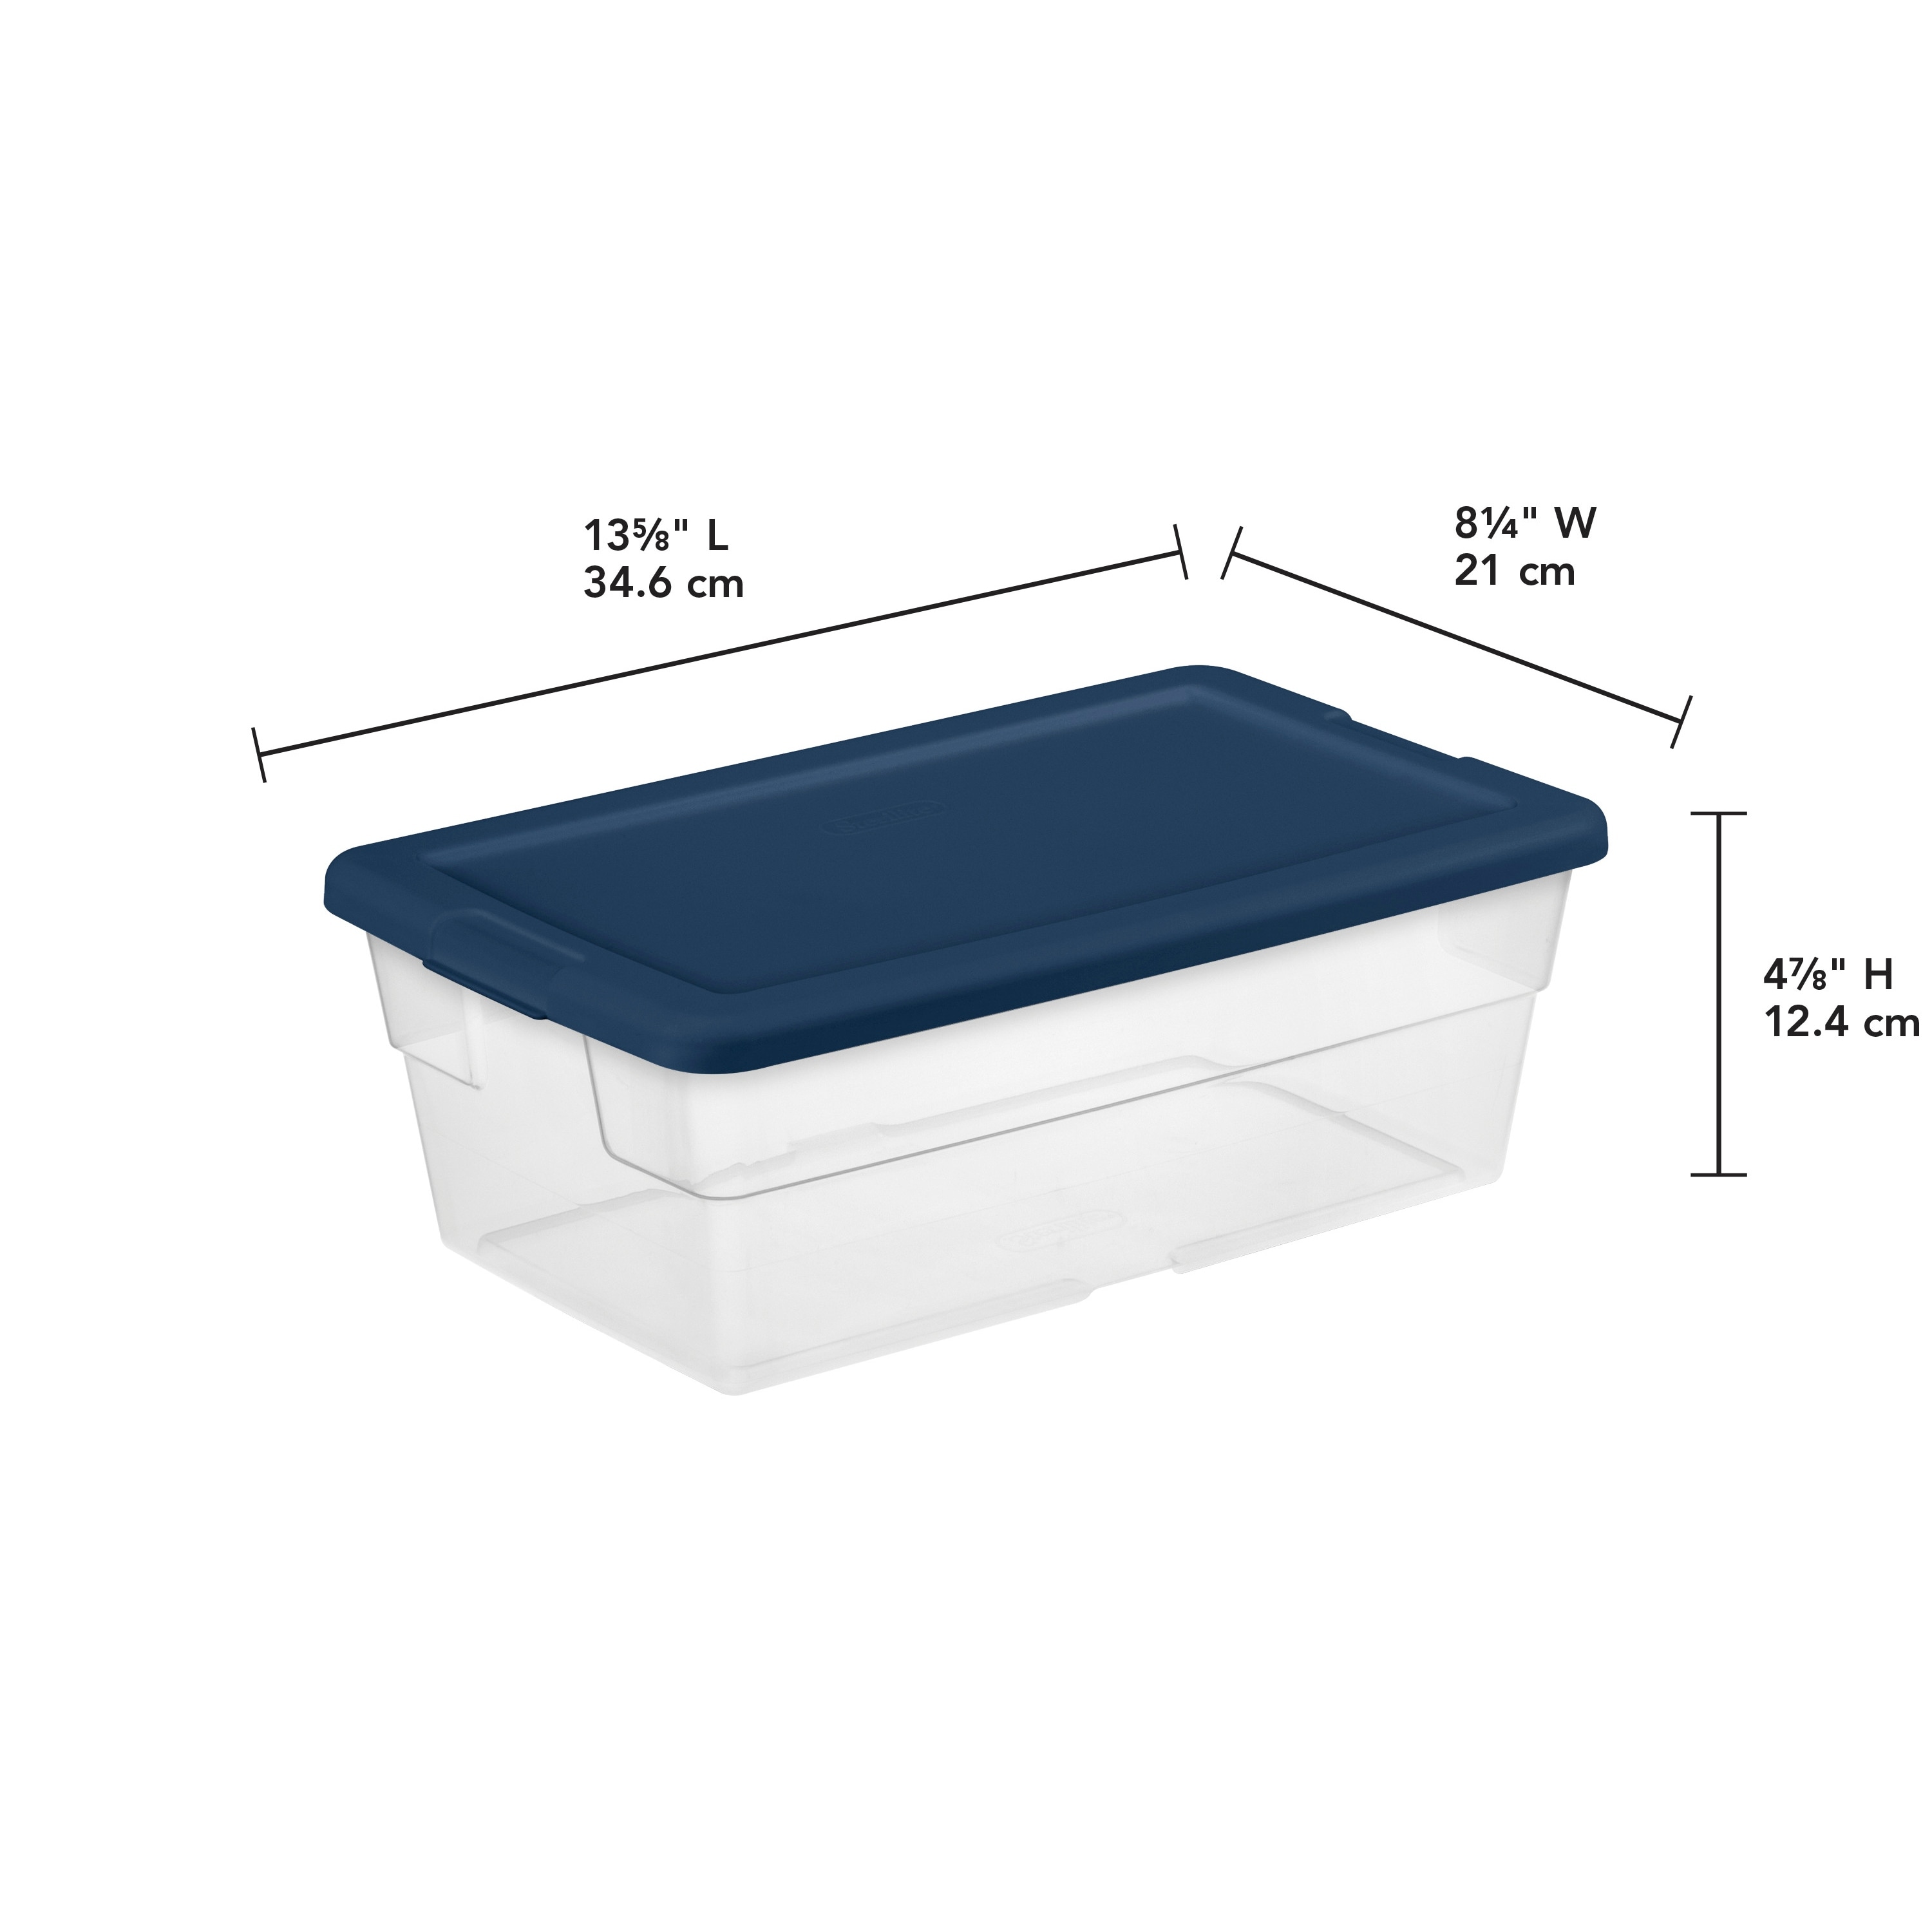 https://ak1.ostkcdn.com/images/products/is/images/direct/1fb31b111b1718d46799b2c219ded97ebba4e56d/Sterilite-Stackable-6-Qt-Storage-Box-Container%2C-Clear%2C-Marine-Blue-Lid-%2830-Pack%29.jpg